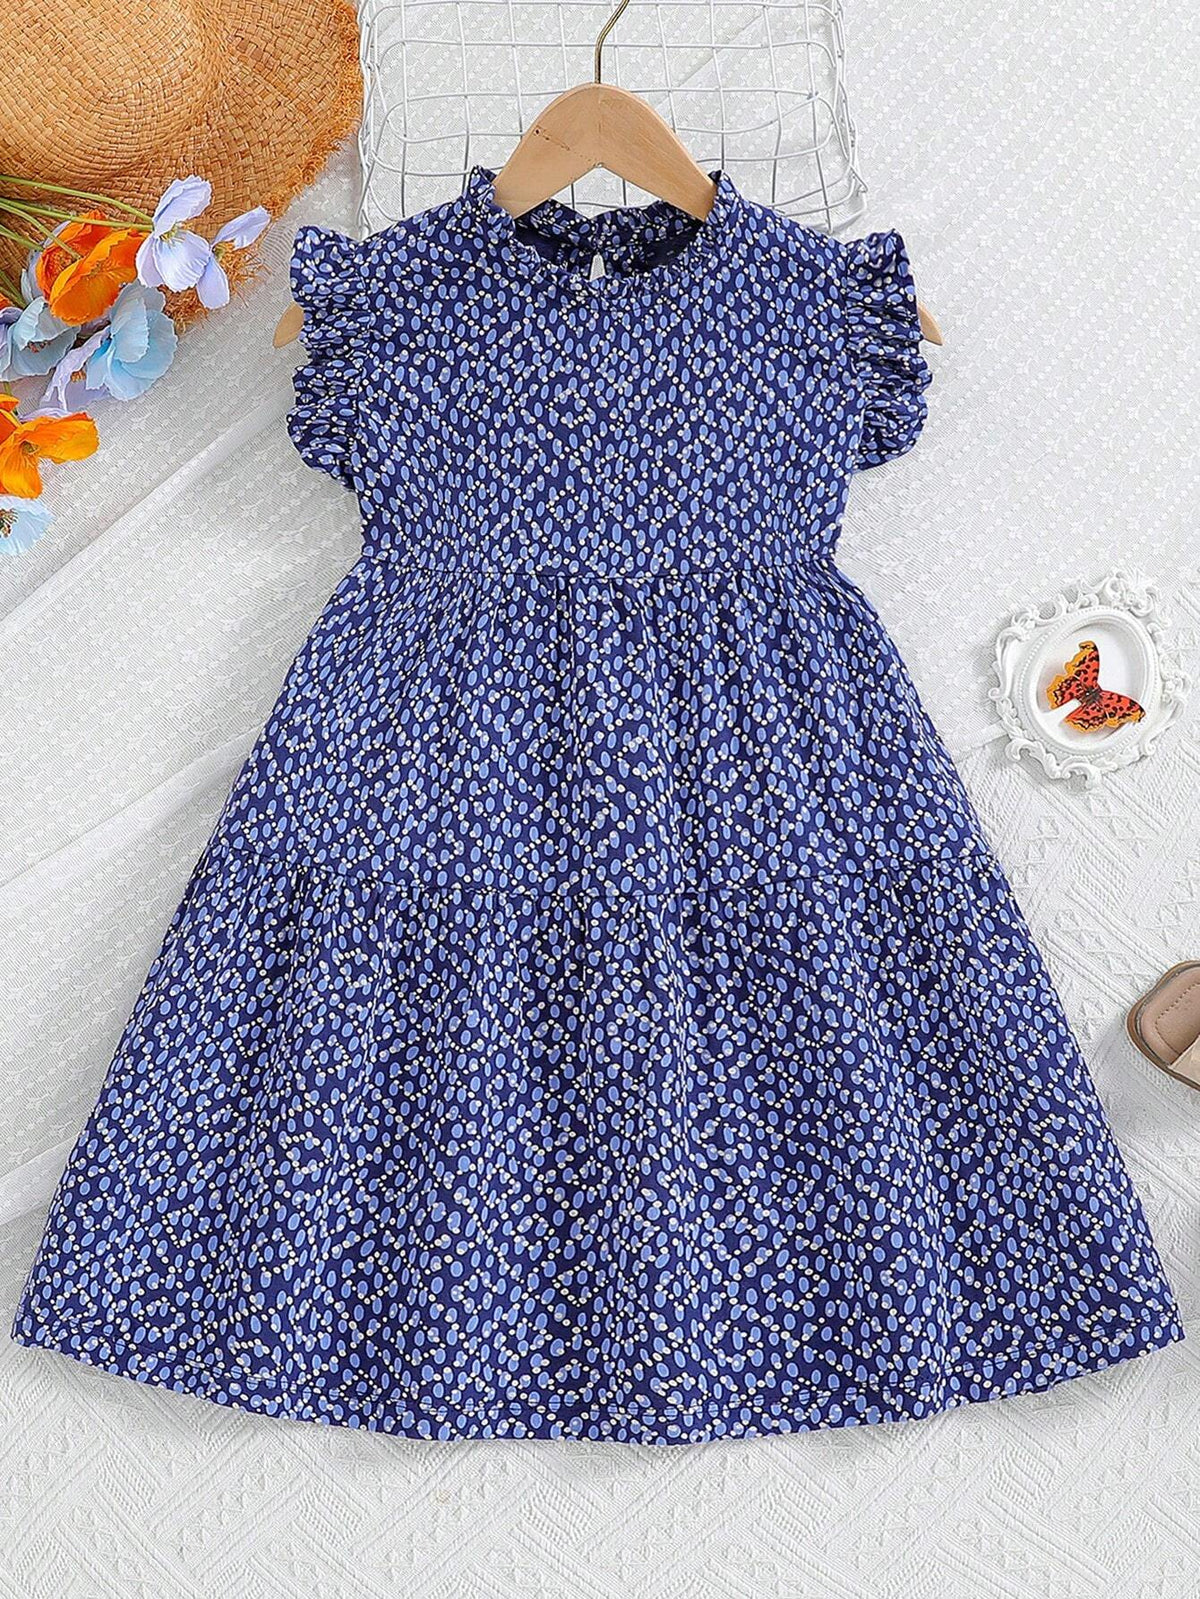 Girls" Casual Cute Polka Dot Short Flutter Sleeve Dress With Elastic Waistband, Suitable For Daily And Outdoor Activities